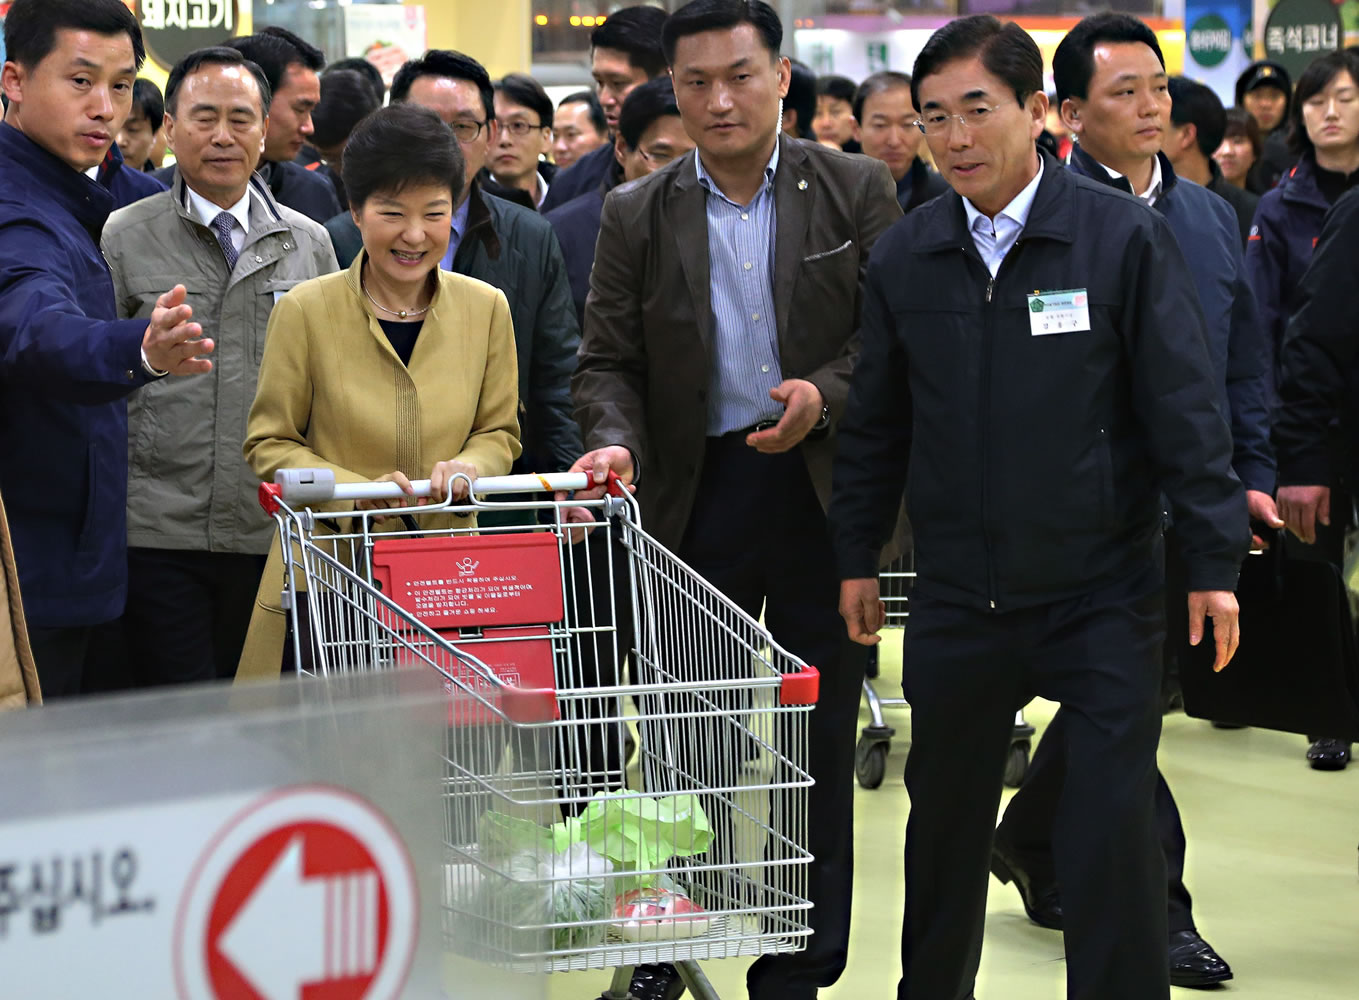 South Korean President Park Geun-hye, third from left, pushes a cart to a counter to pay for her purchases at a retail store in Seoul, South Korea, on Wednesday.